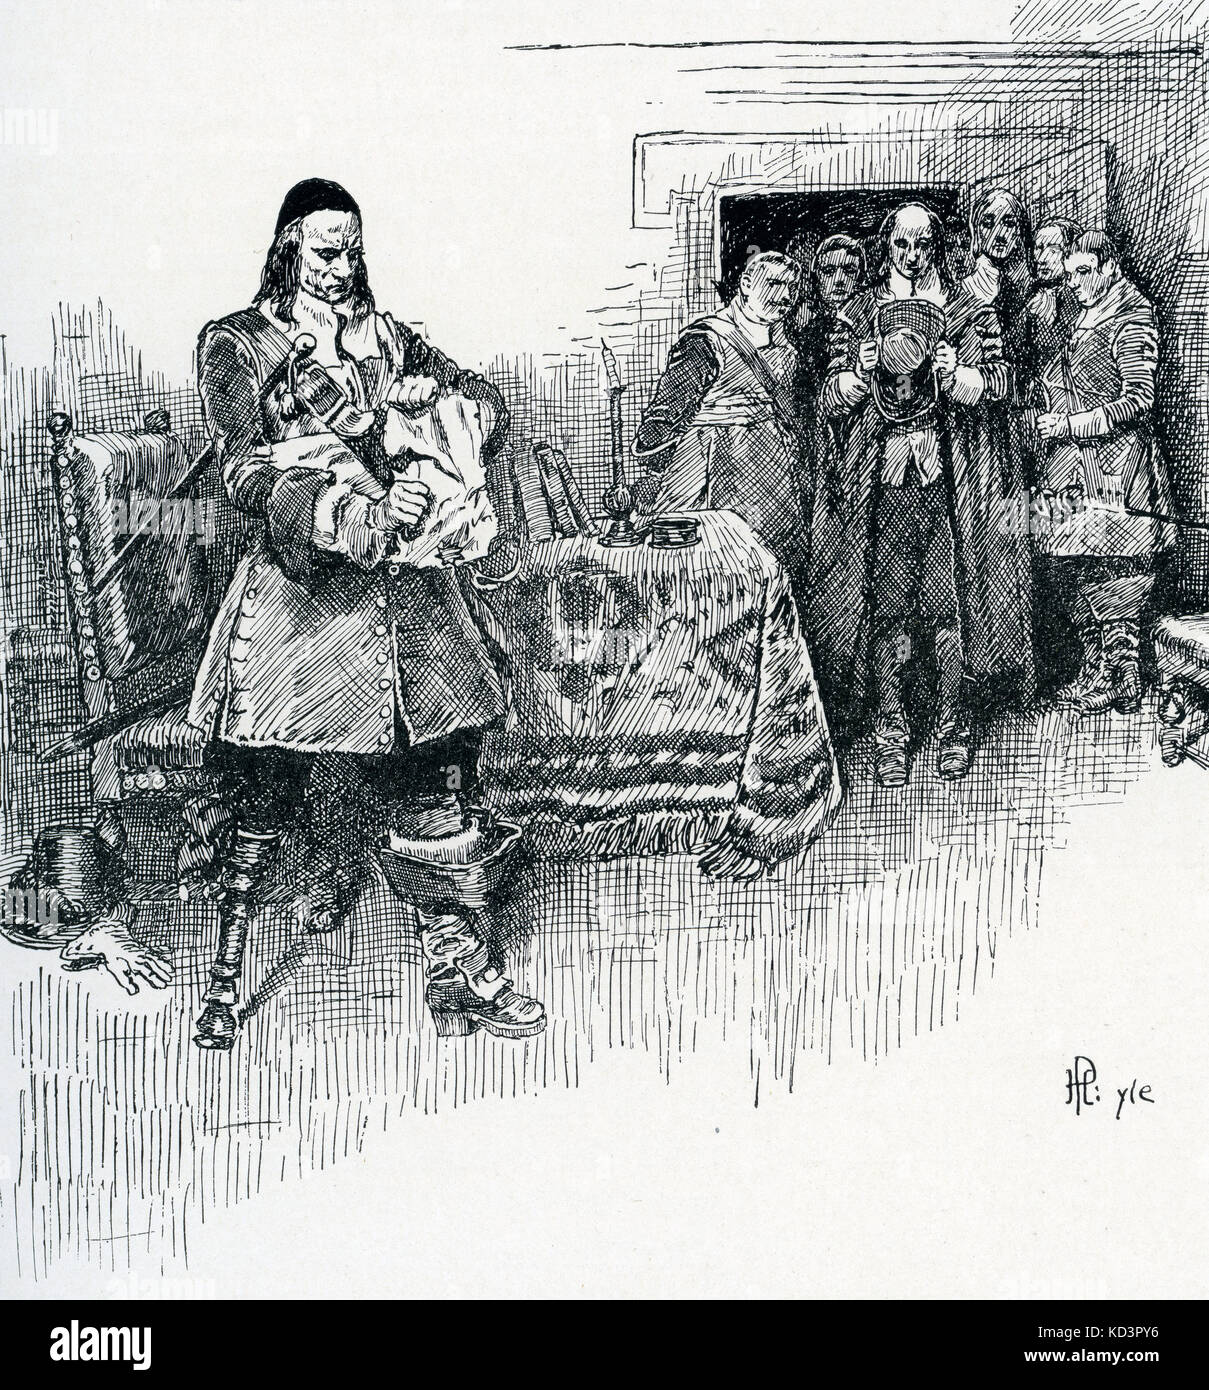 Peter Stuyvesant, last Dutch governor of New York (then New Amsterdam), tears up the letter sent in the name of Charles II and James, Duke of York, demanding the surrender of New York to the British 1664. Illustration by Howard Pyle, 1883 Stock Photo